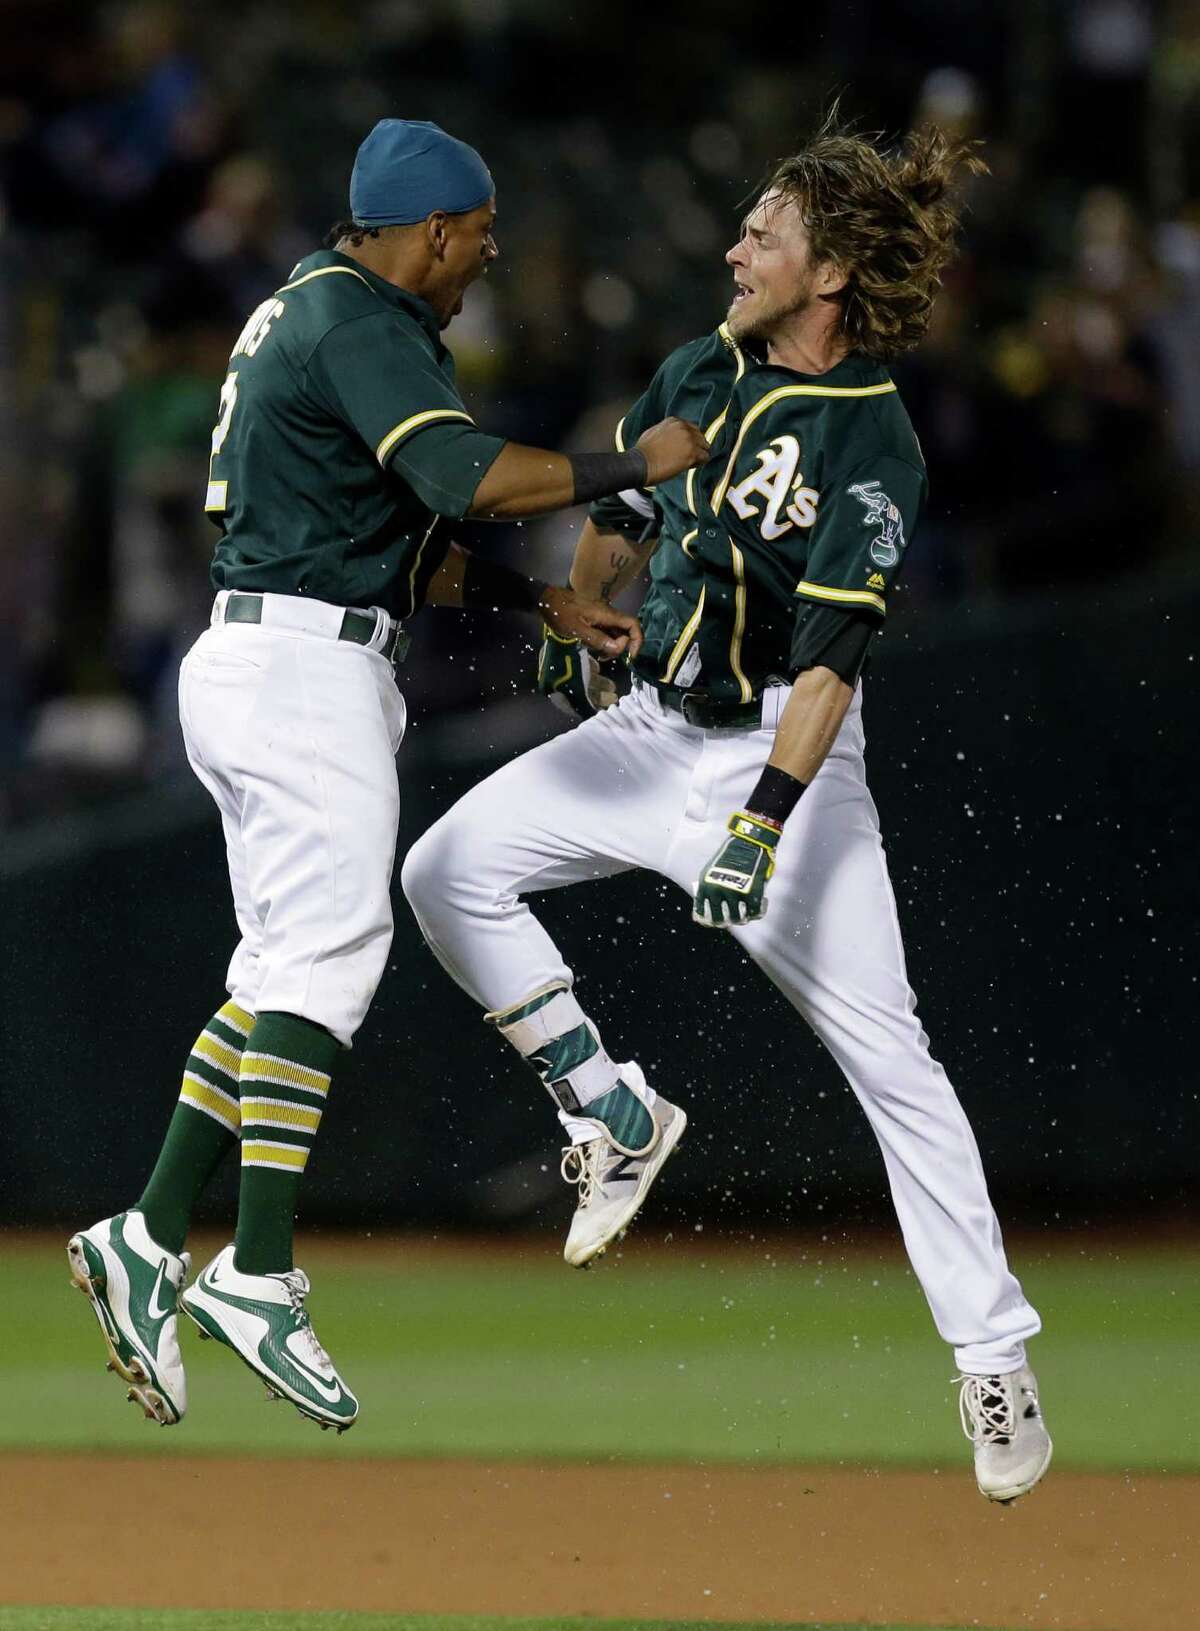 Oakland Athletics' Josh Reddick, right, celebrates with Khris Davis after making the game winning hit in the tenth inning of a baseball game against the Houston Astros Tuesday, July 19, 2016, in Oakland, Calif. (AP Photo/Ben Margot)